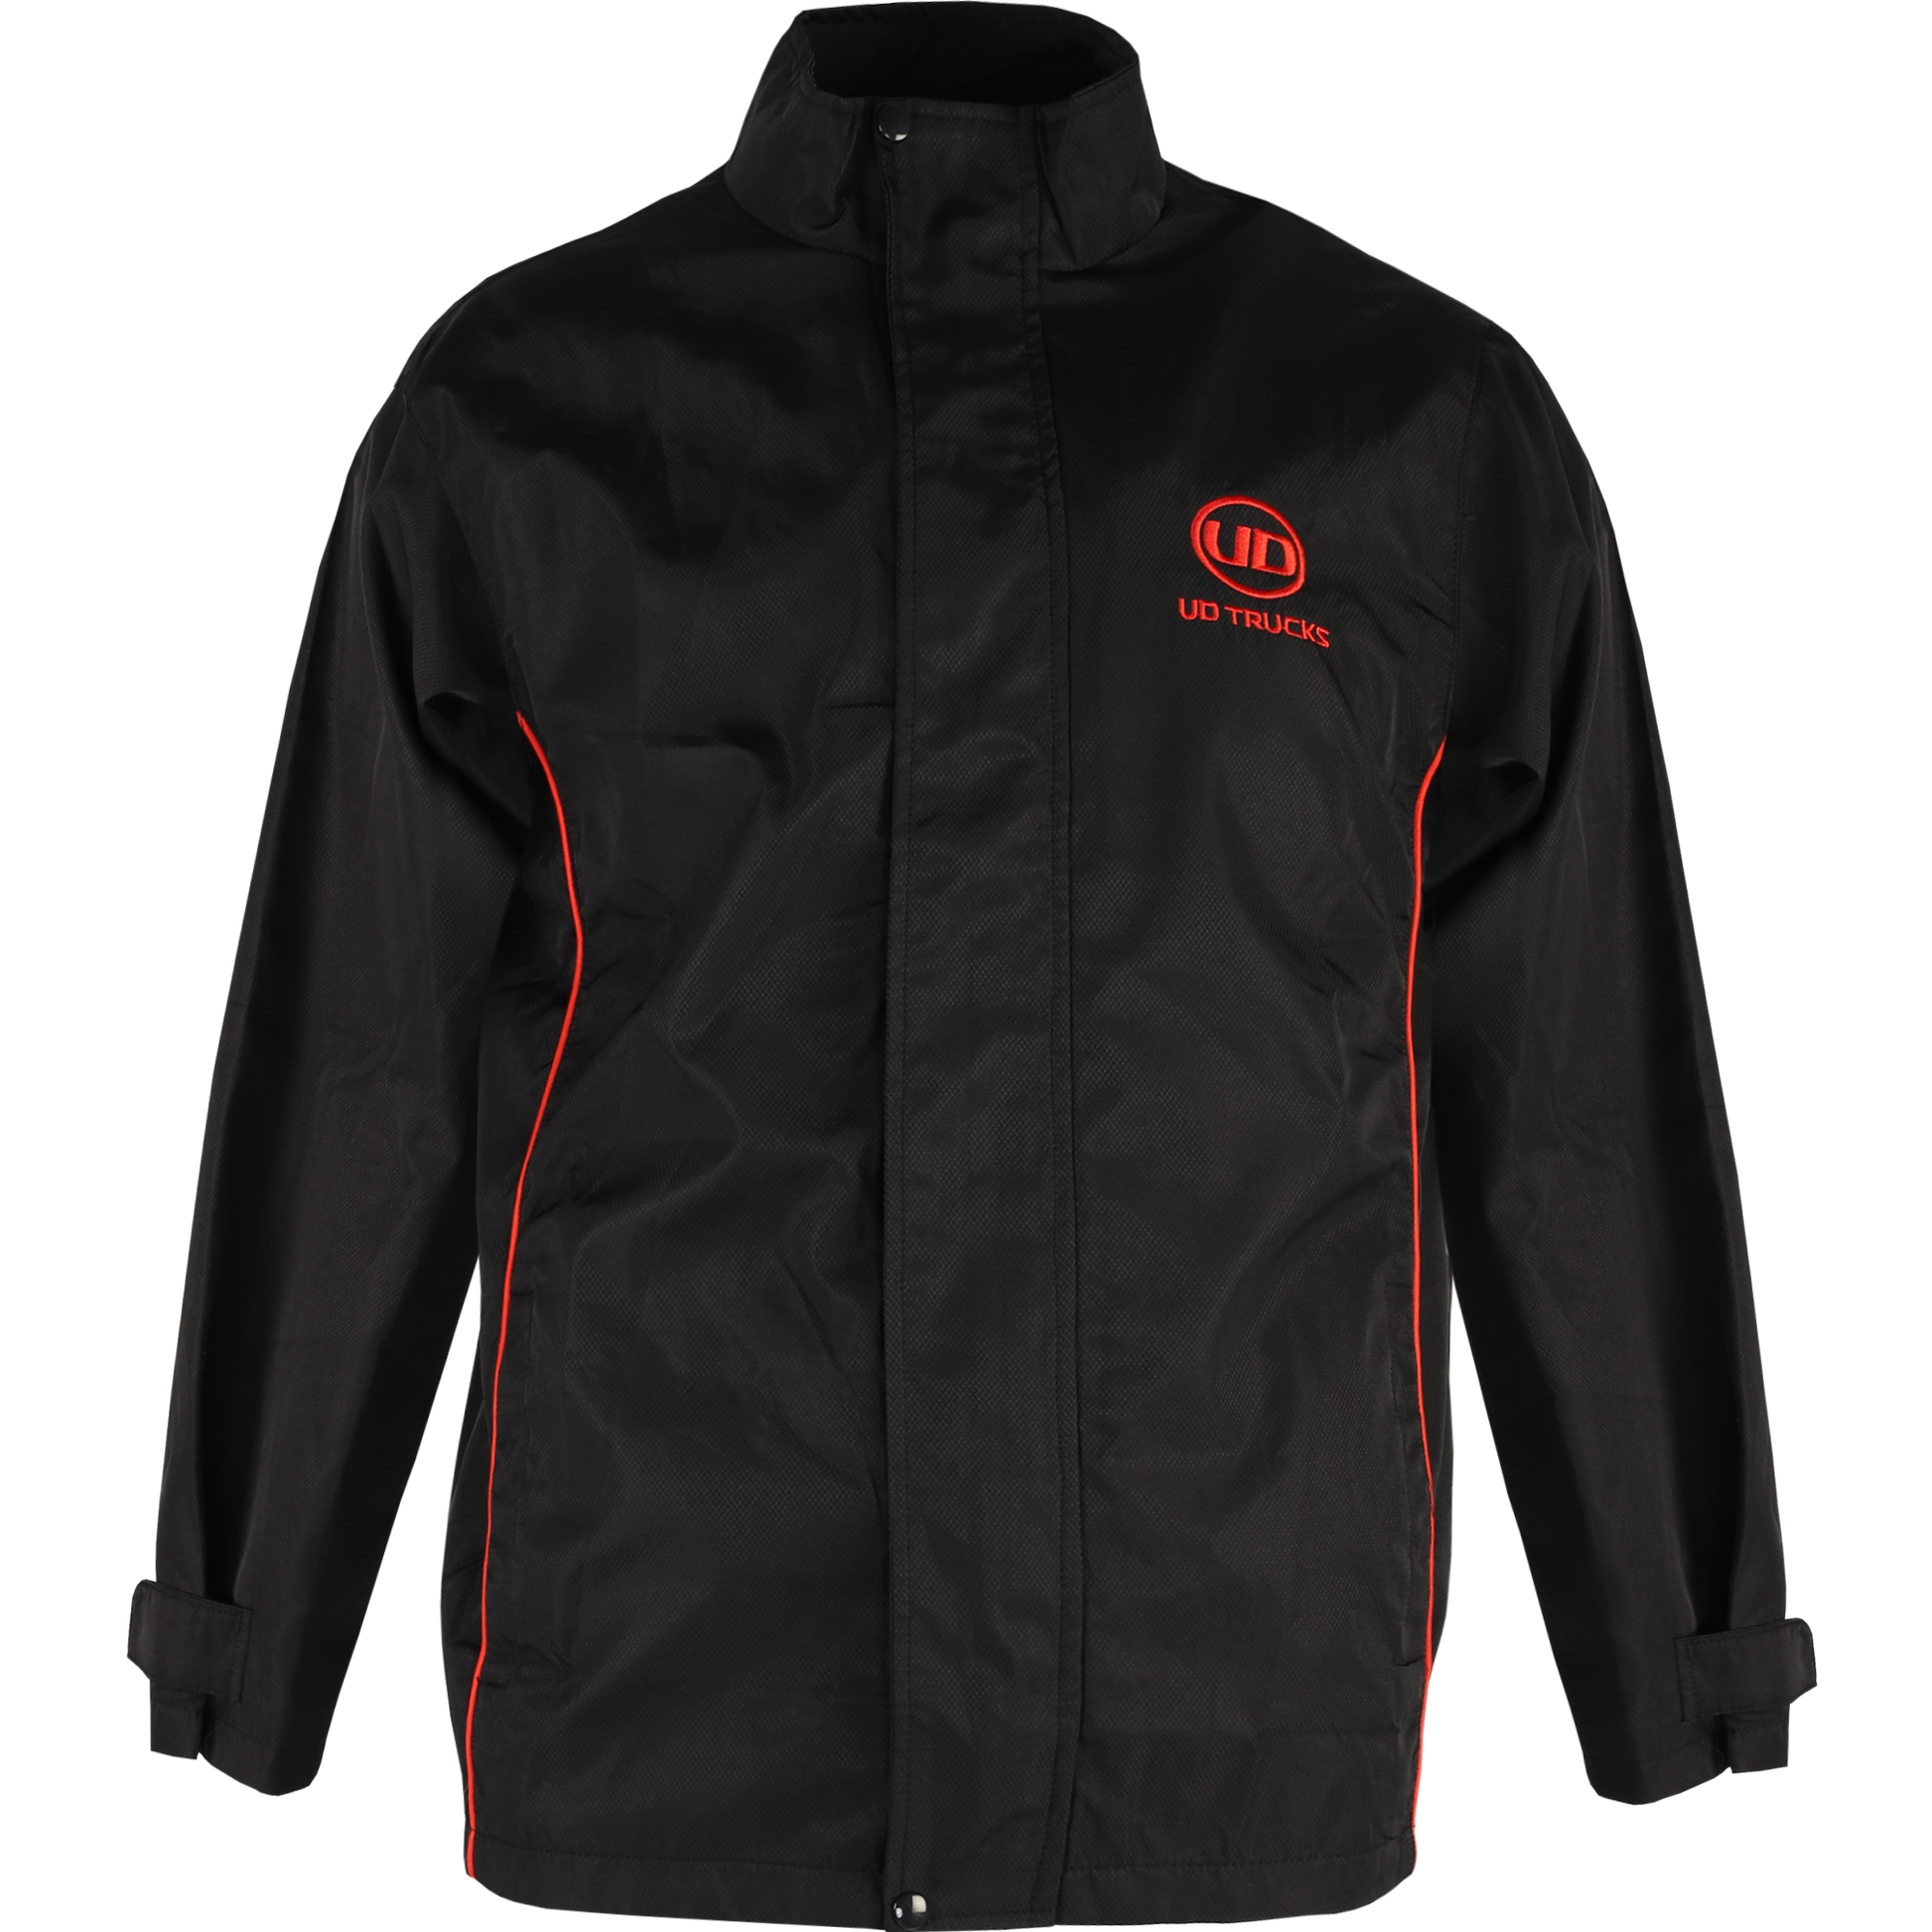 Lightweight Windbreaker with Red Trims - Uniform by CYC Corporate Label Singapore